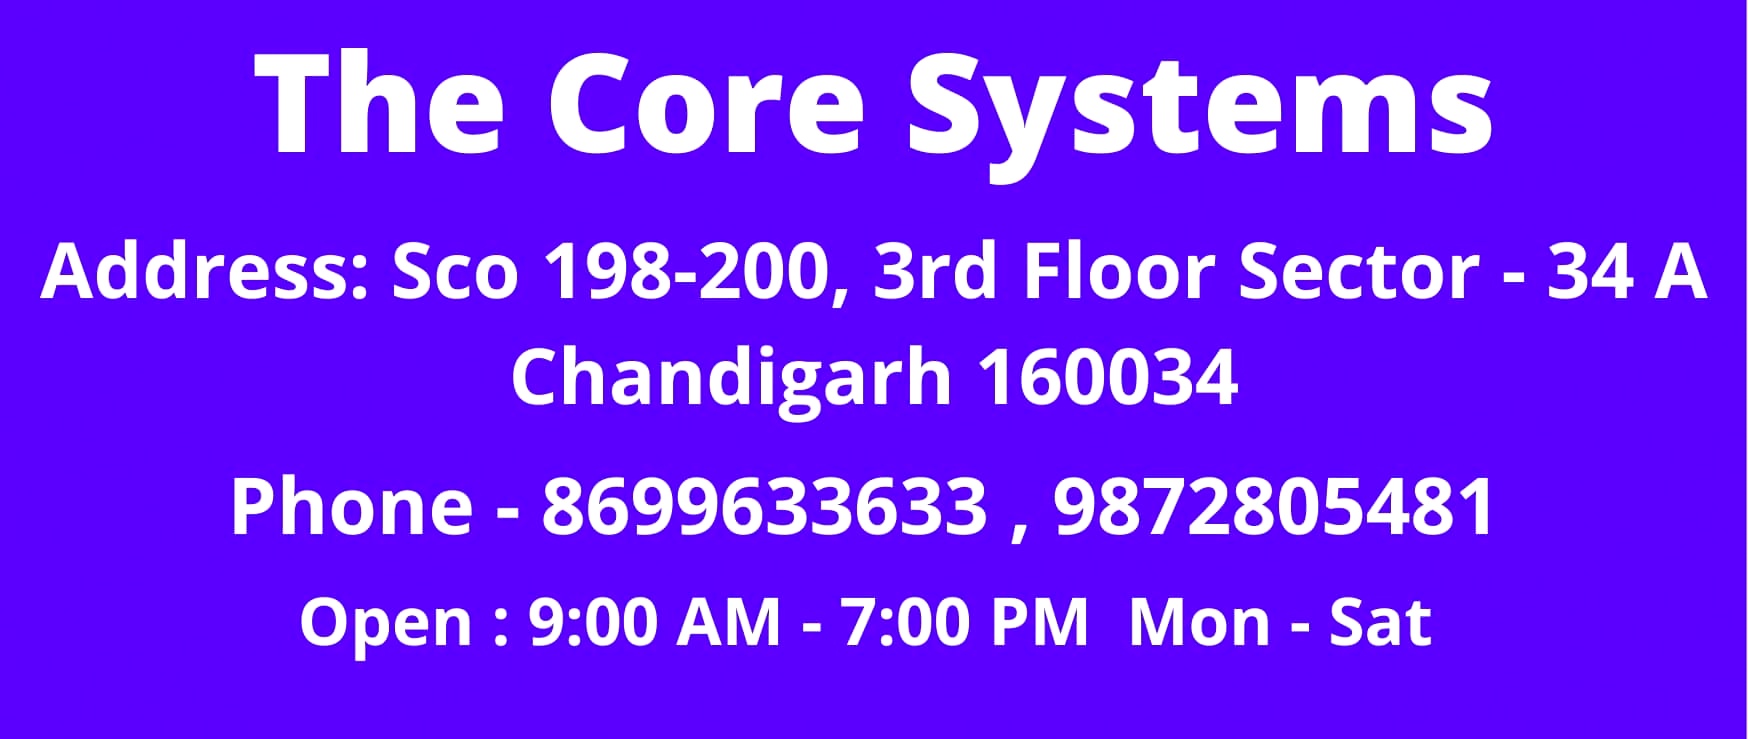 Python Training in Haryana at The Core Systems python training in himachal pradesh Python Training in Himachal Pradesh with IoT at The Core Systems 2